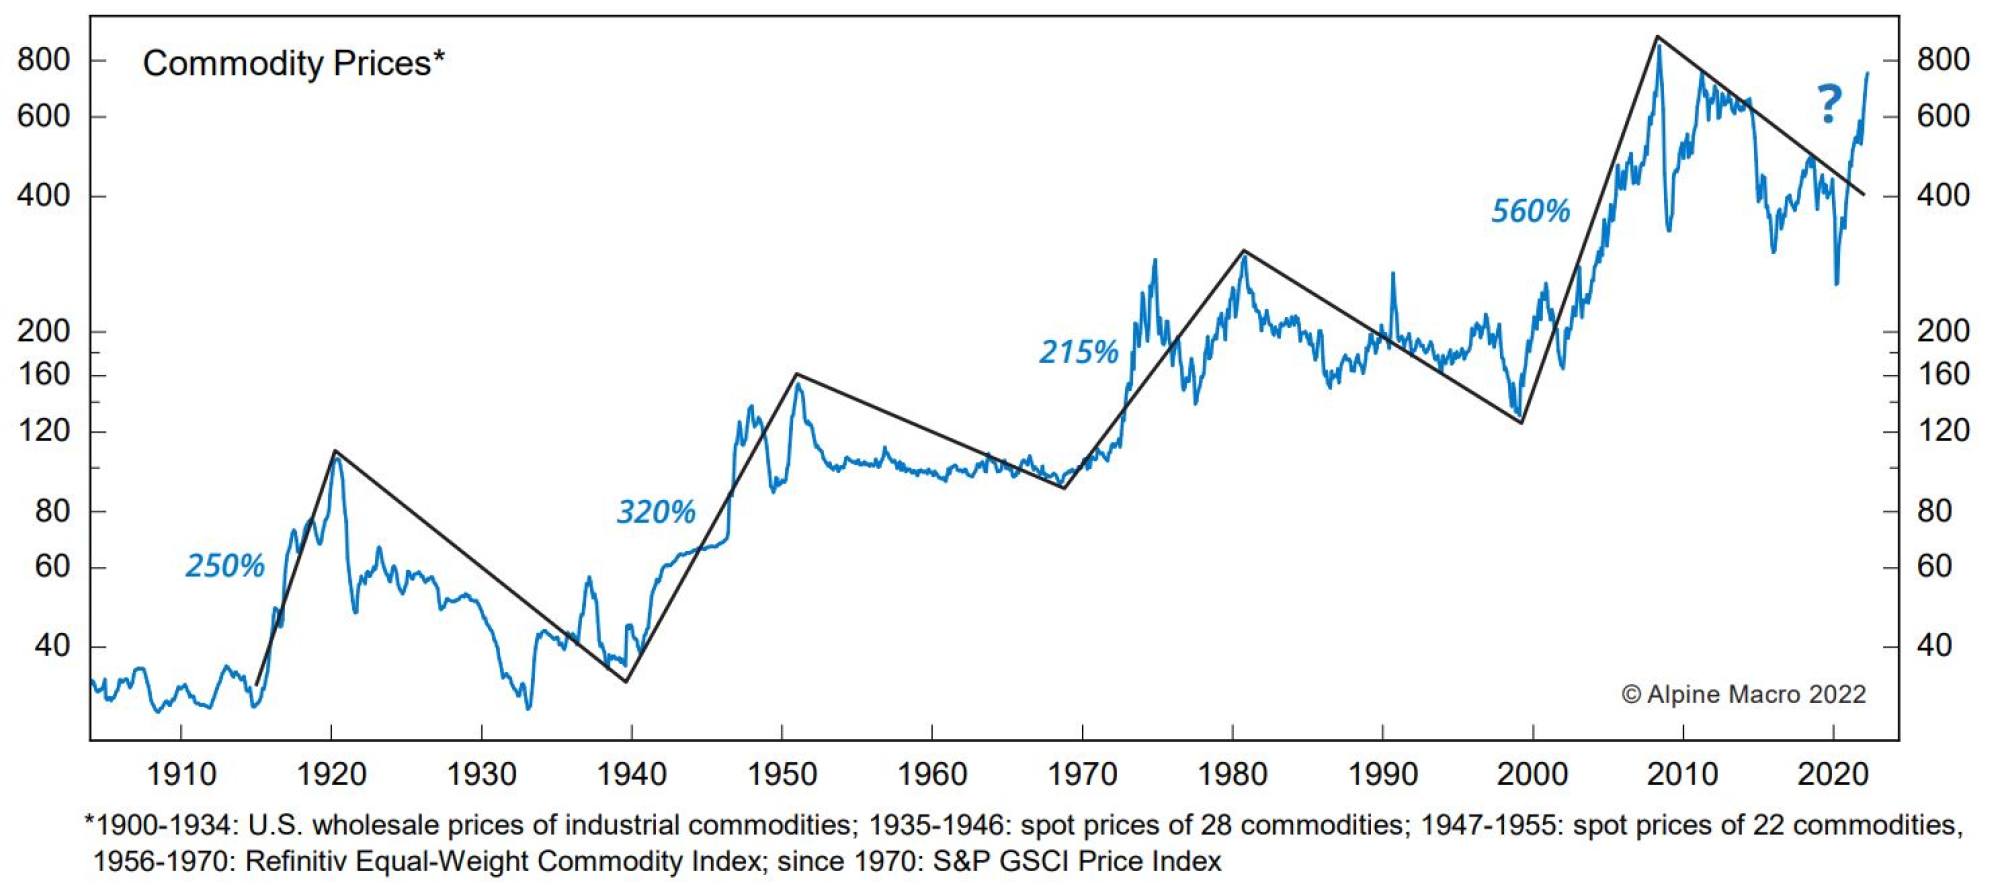 A secular bull market for commodities, with ascending tops and bottoms, may be developing. Source: Alpine Macro